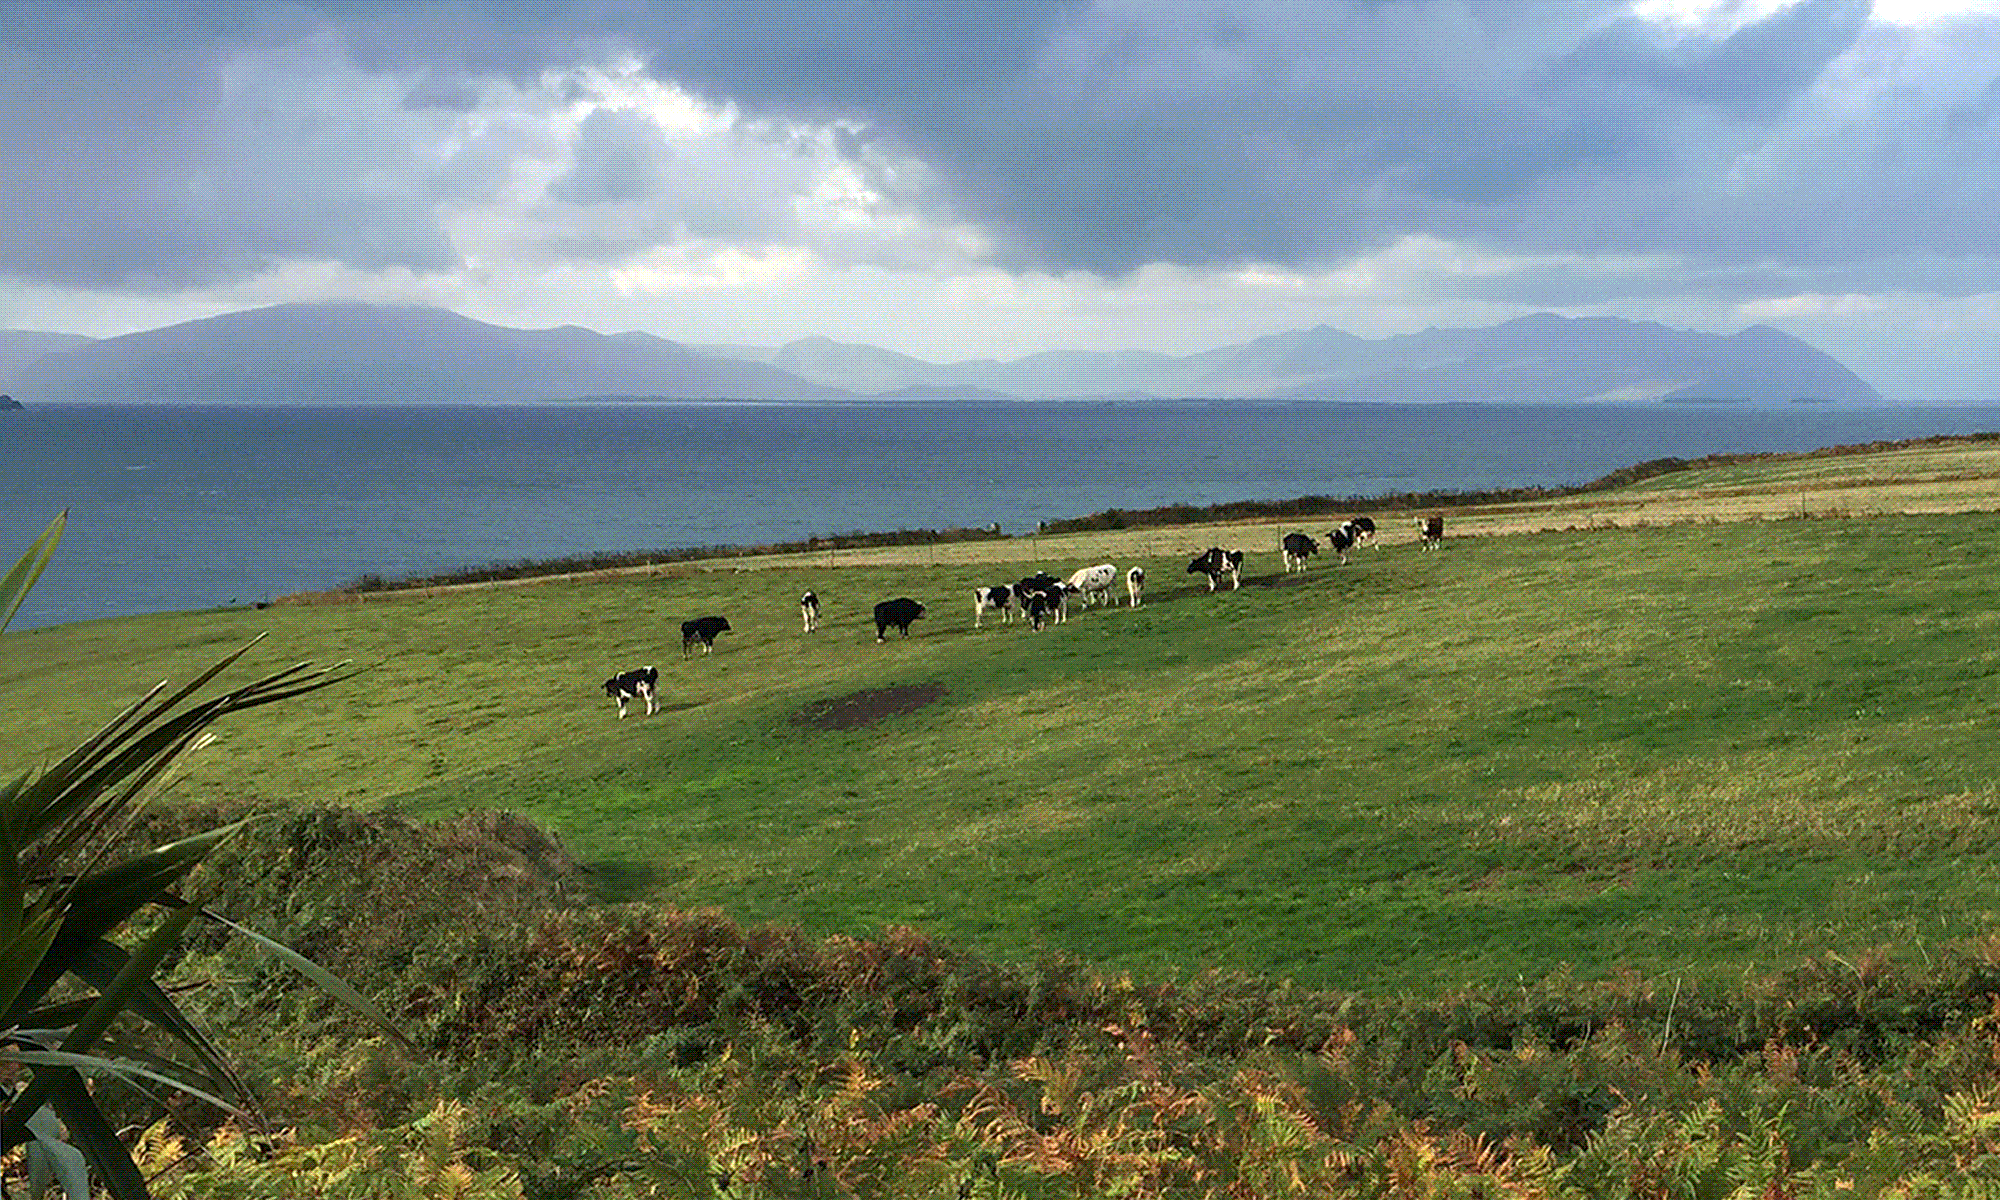 Clouds above, mountains across Ballyheigue Bay, cows grazing in clifftop fields